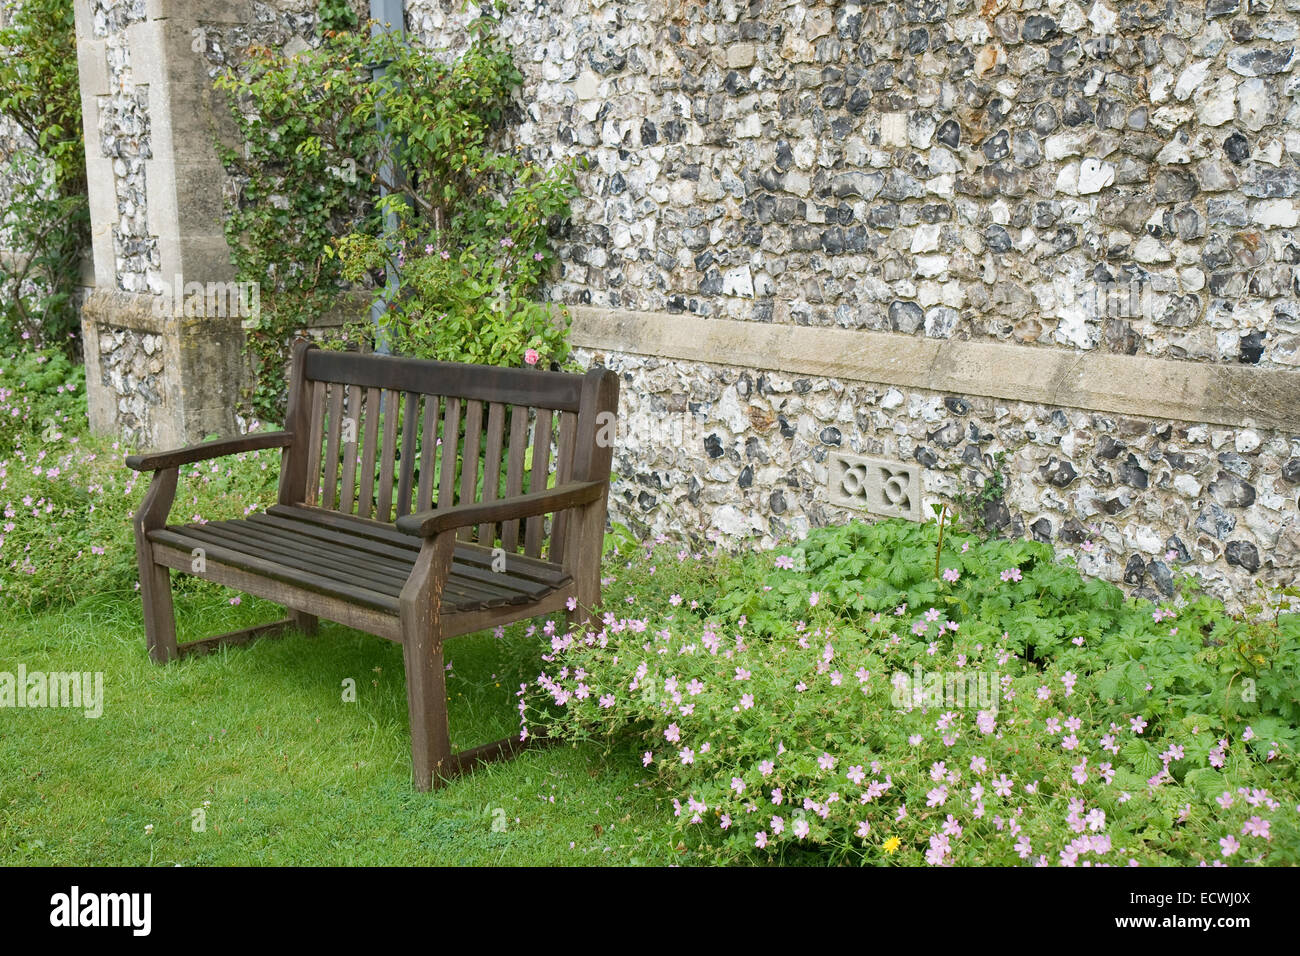 Bench at the wall of an old English church near London. Stock Photo